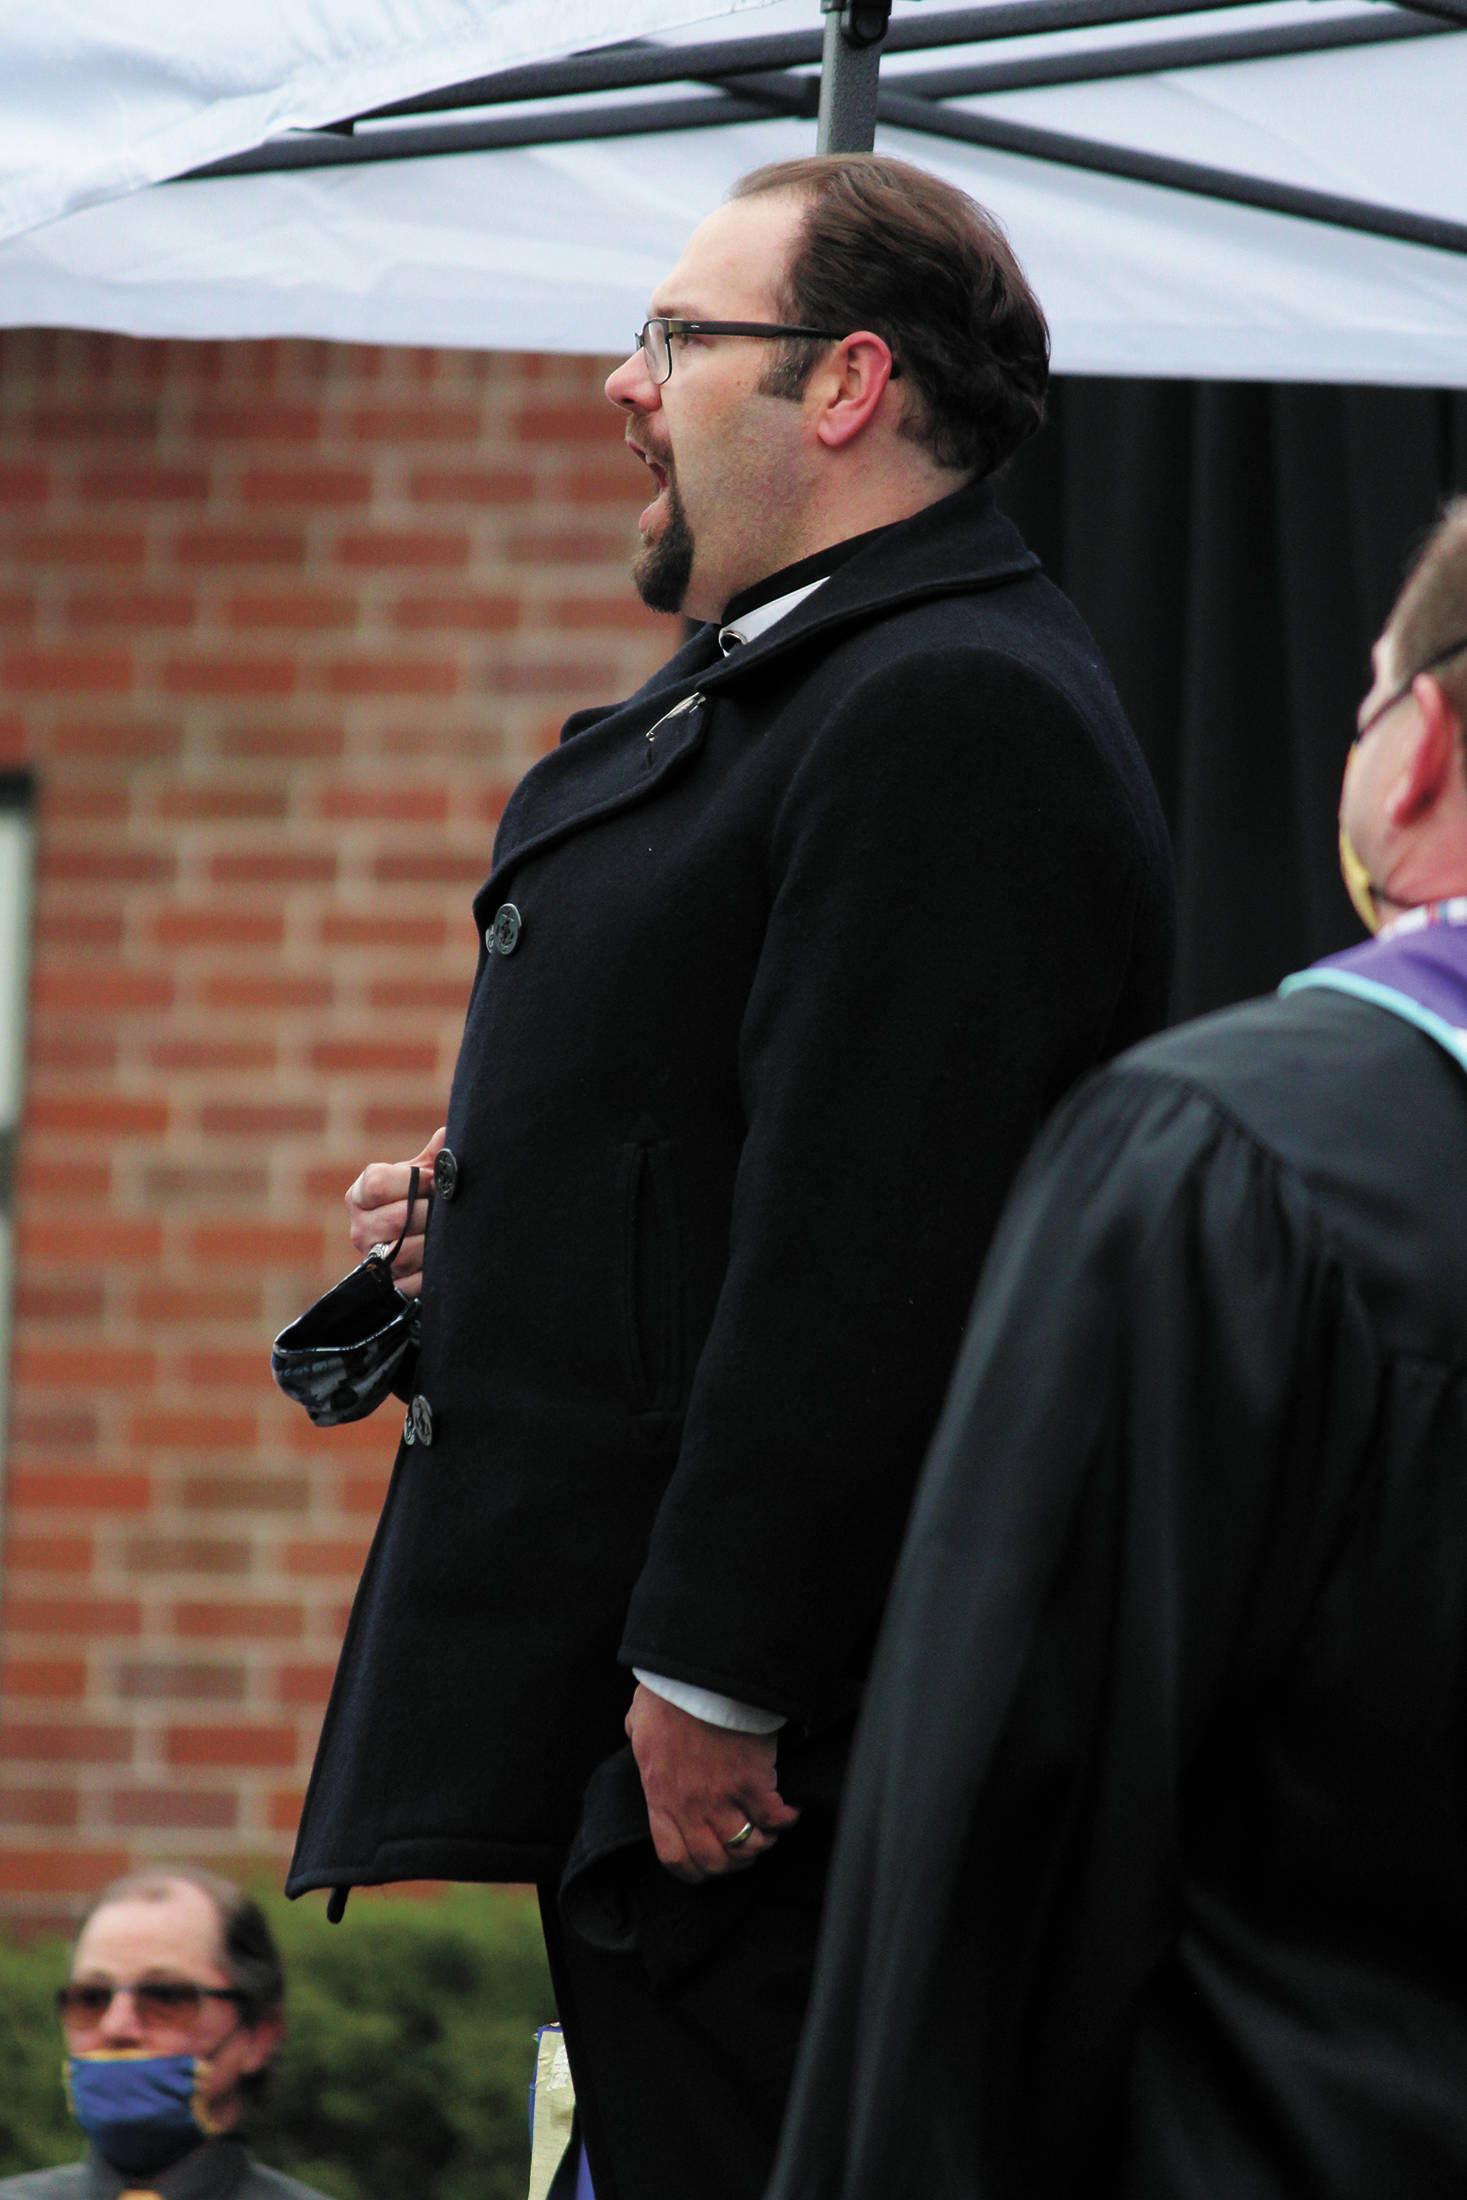 Kyle Schneider, director of choirs for Homer High School and Homer Middle School, sings the national anthem at Homer High School’s Monday, May 18, 2020 graduation ceremony at the school in Homer, Alaska. (Photo by Megan Pacer/Homer News)